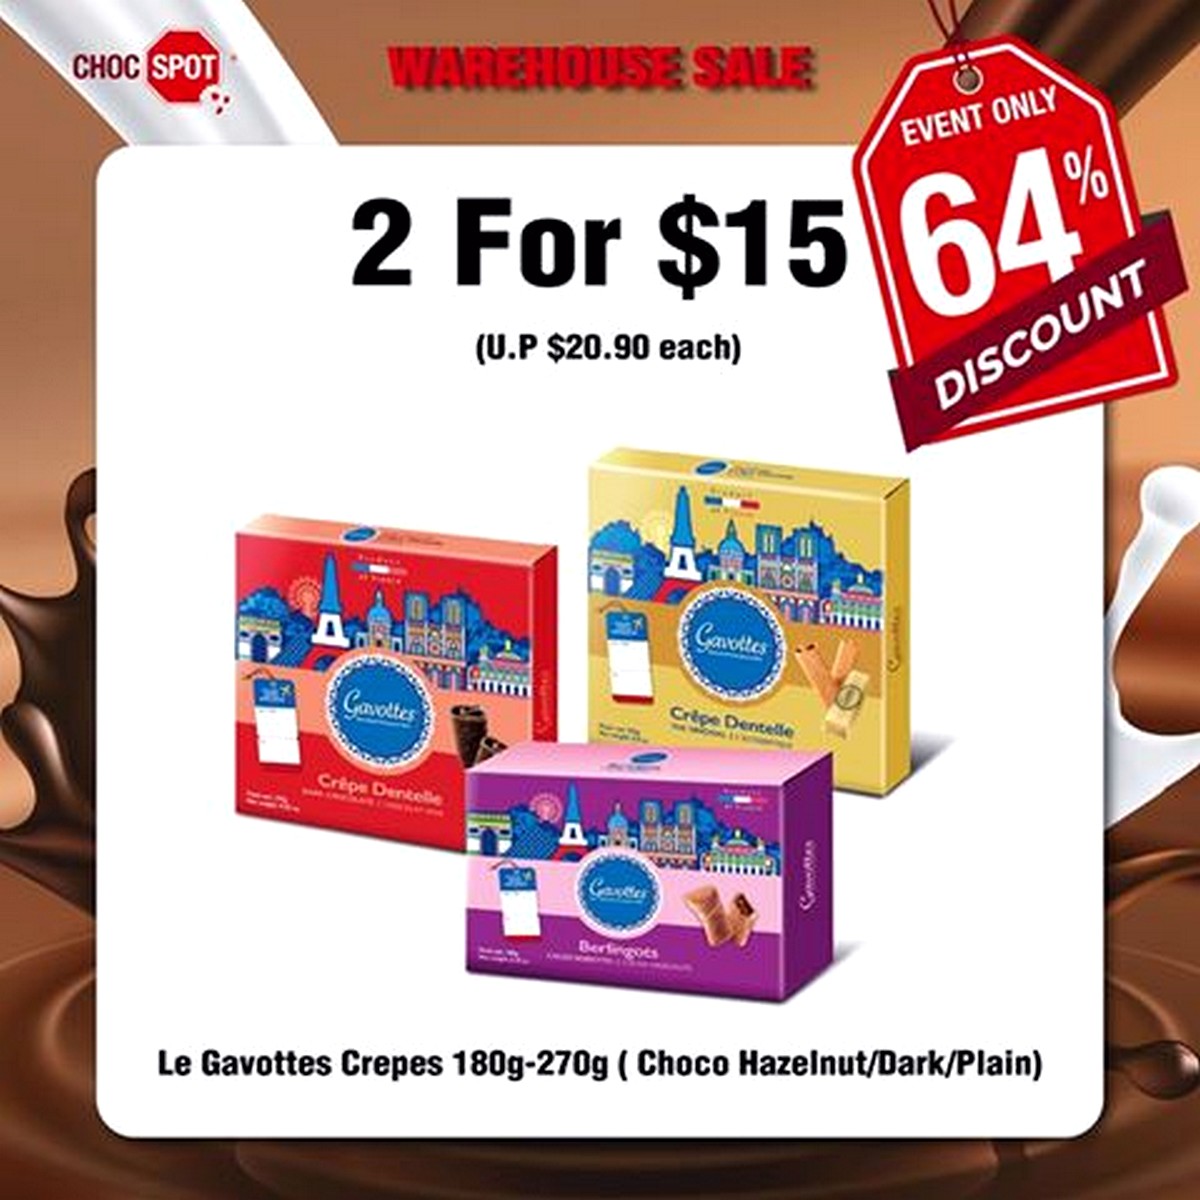 Choc-Spot-Warehouse-Sale-Highlights-006 24 Jul-2 Aug 2020: Choc Spot Warehouse Sale! Up to 80% off Chocolates, Sweets, Chips, Biscuits!